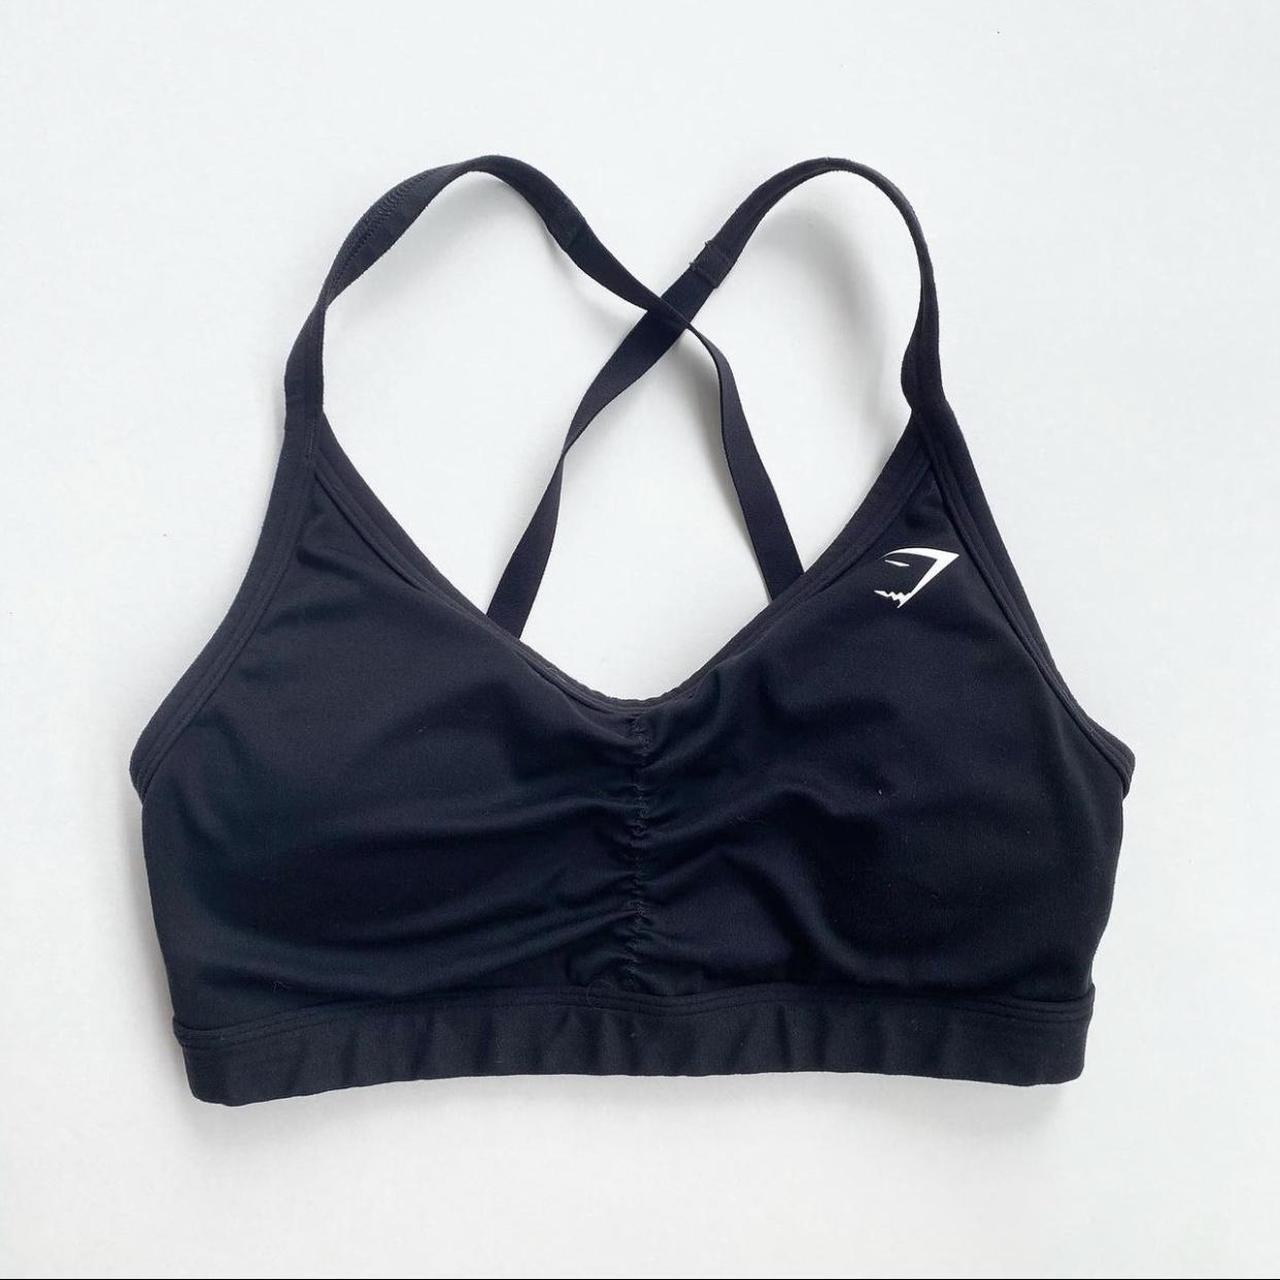 Gymshark Ruched Sports Bra message me for any... - Depop